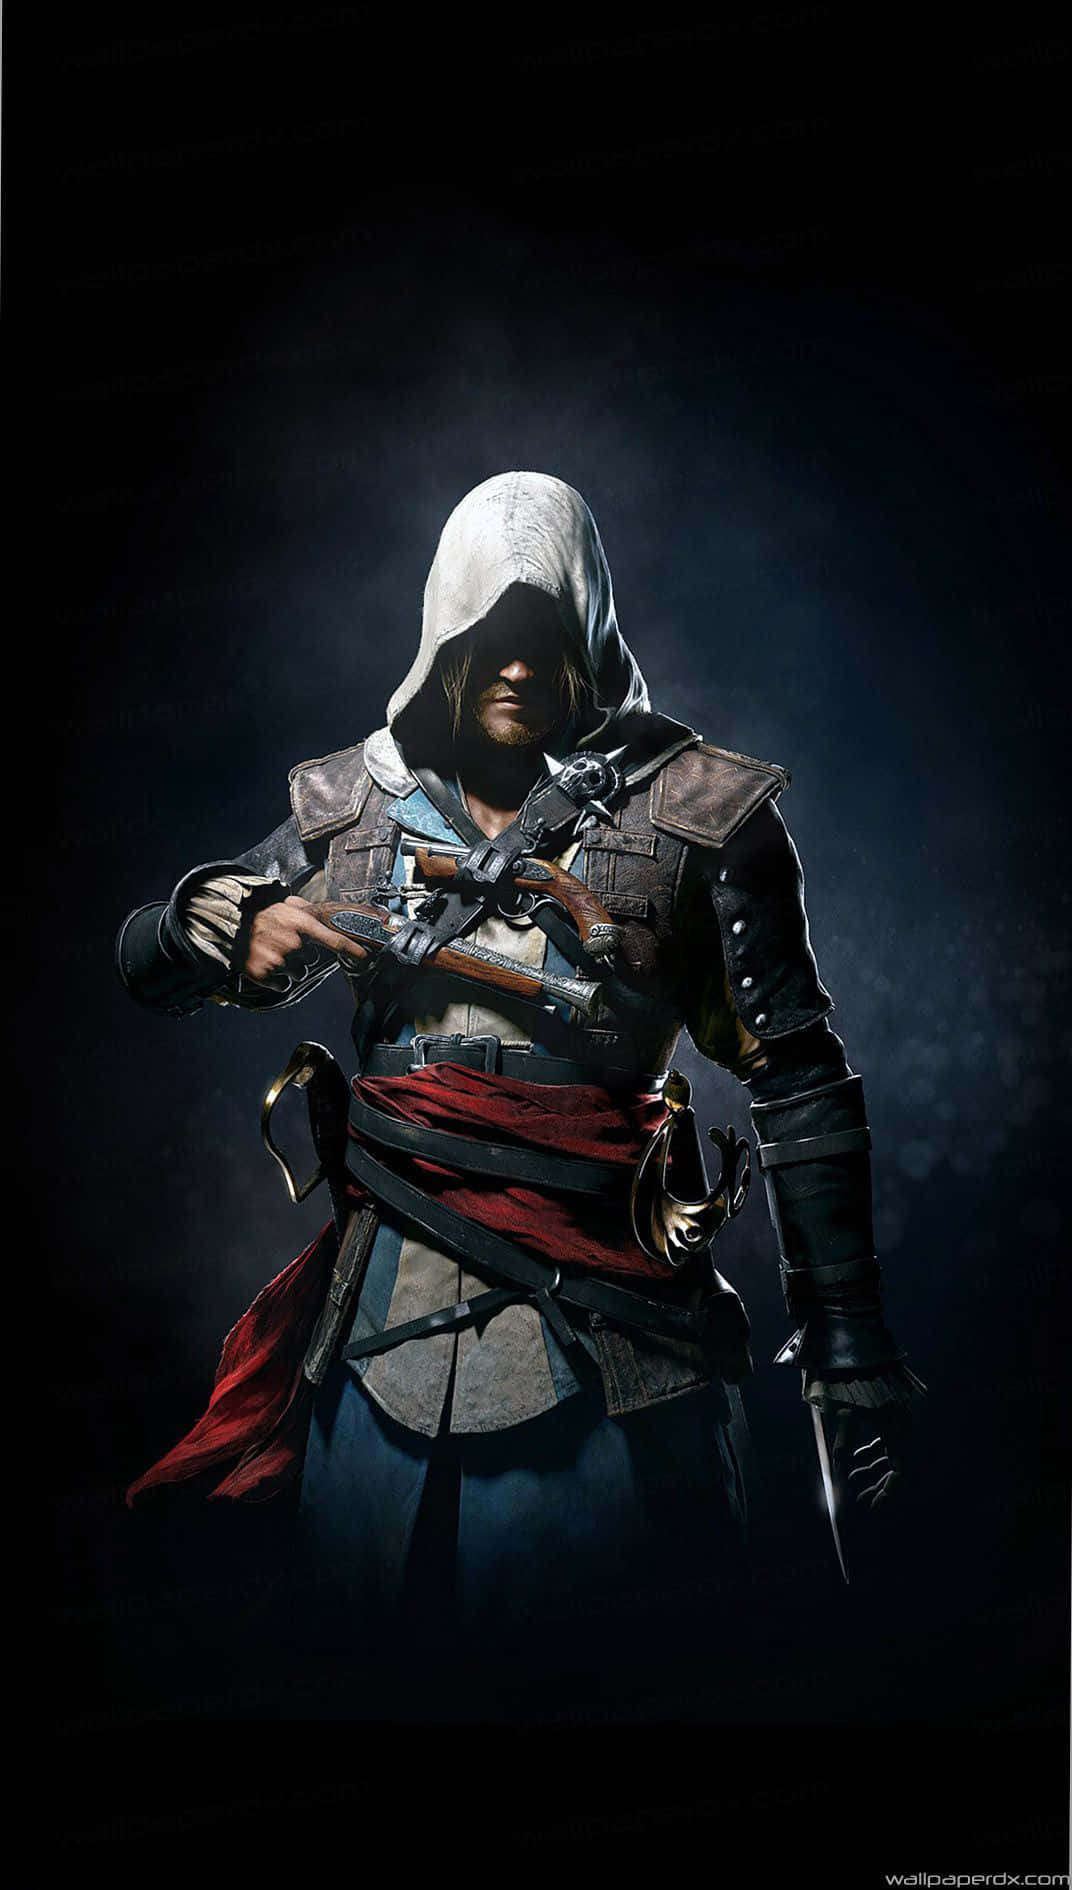 Explore the world of Assassin’s Creed Valhalla on your Iphone X